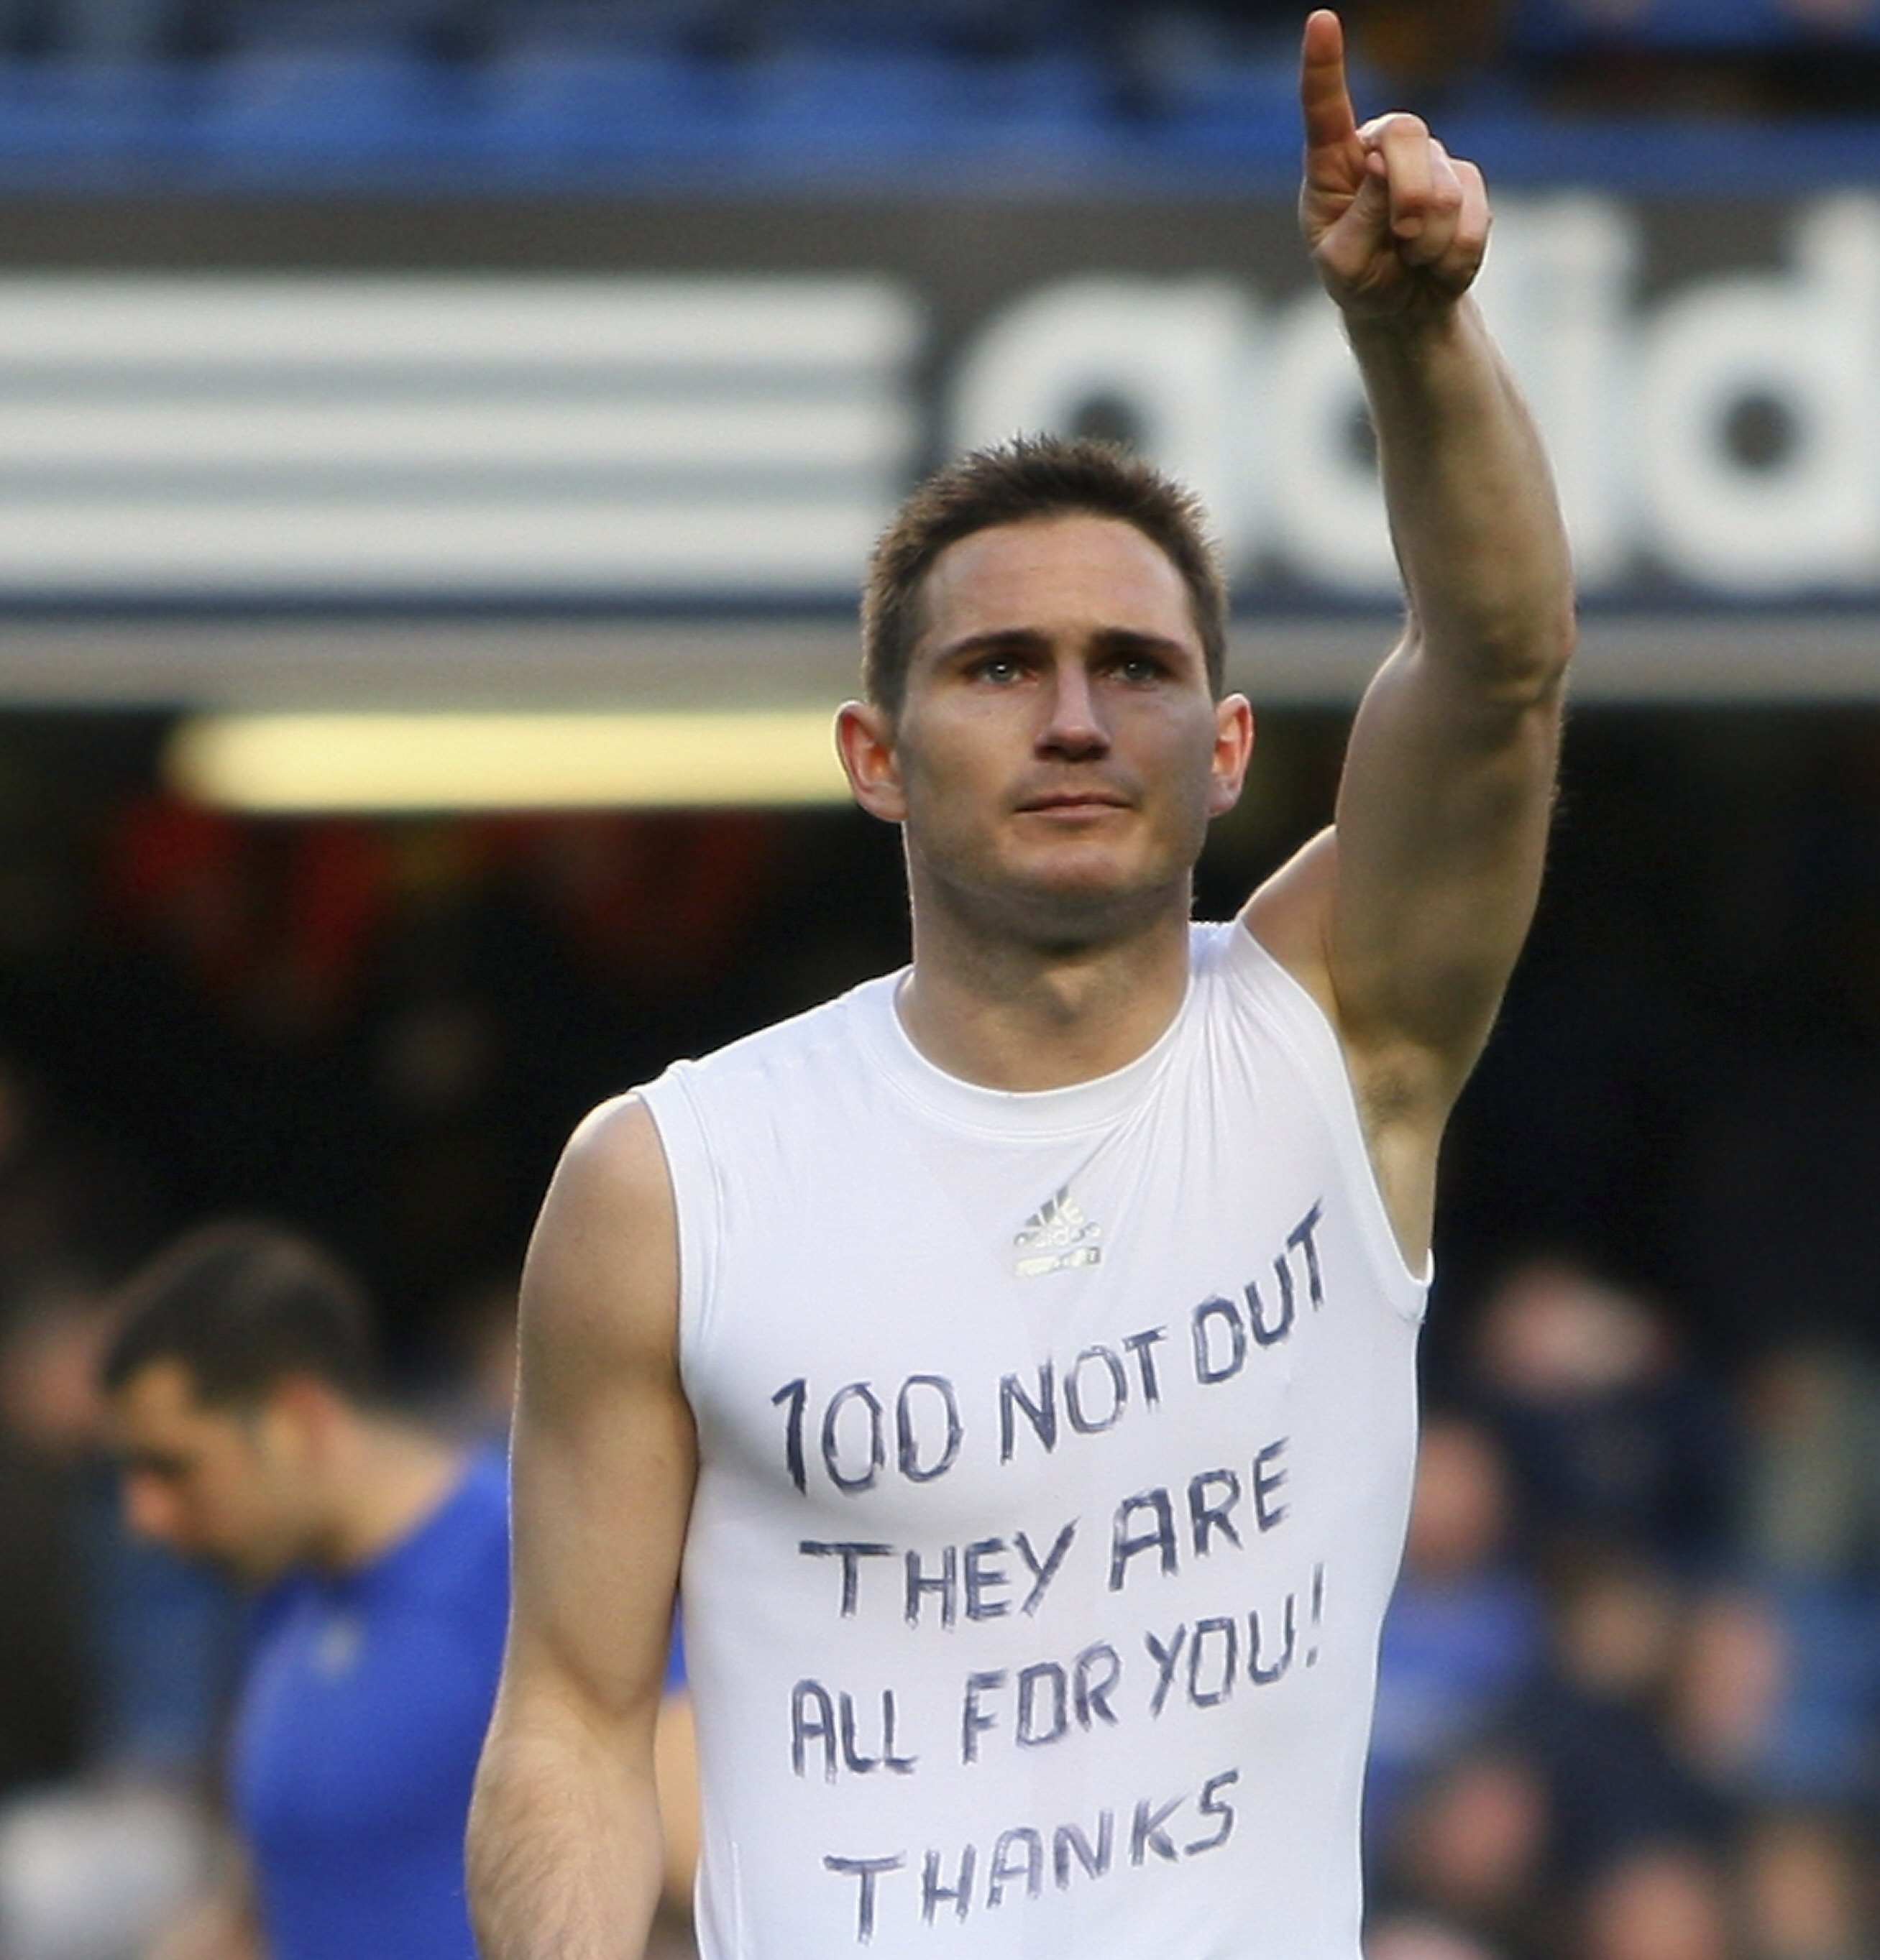 10 people Frank Lampard might have been dedicating his goals to | Who